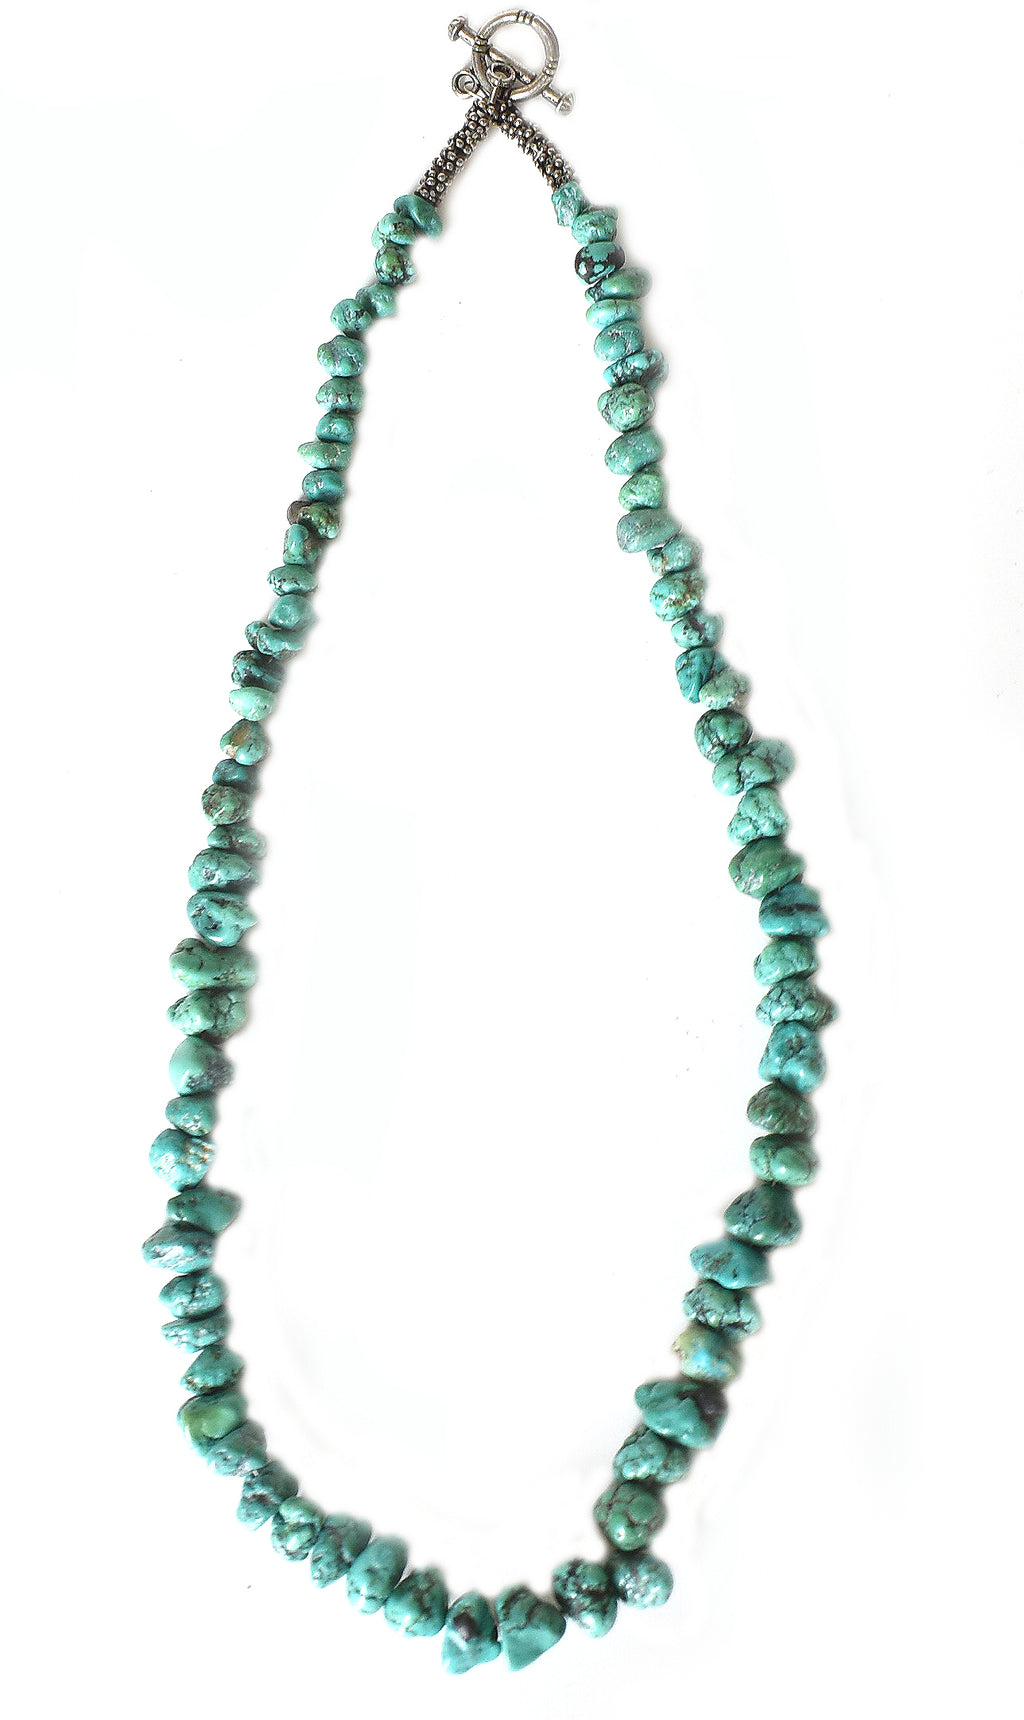 Turquoise Sky Necklace